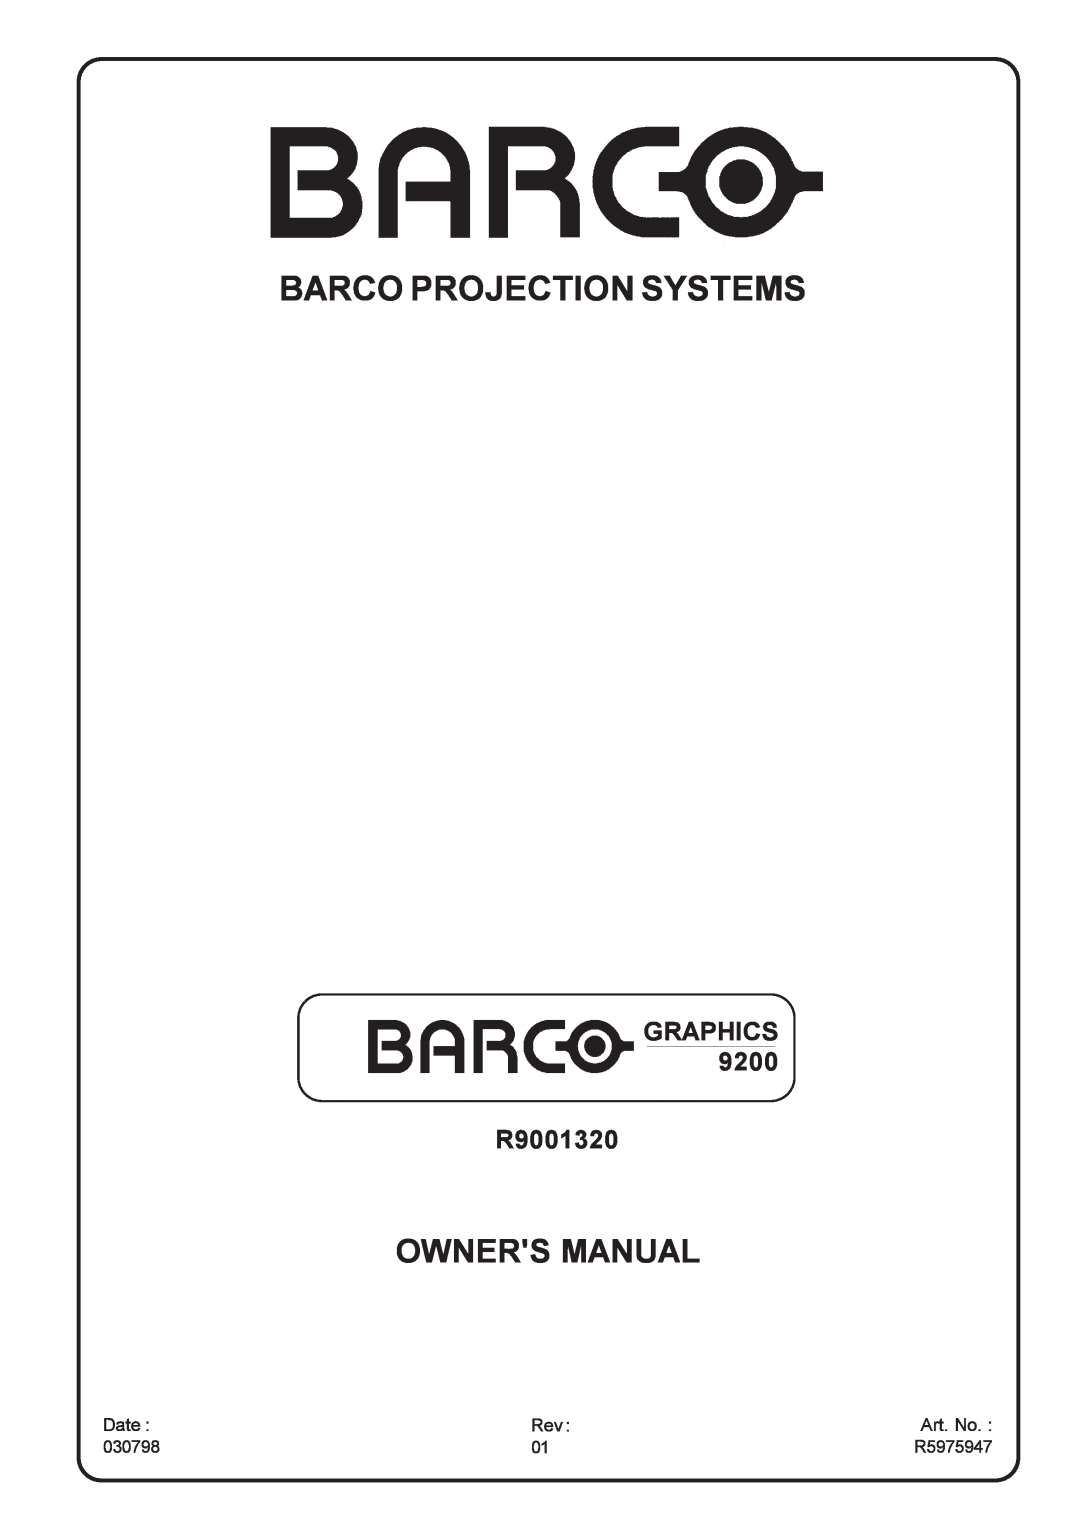 Barco 9200 owner manual Date, Art. No, 030798, R5975947, Barco Projection Systems, Owners Manual, GRAPHICS R9001320 